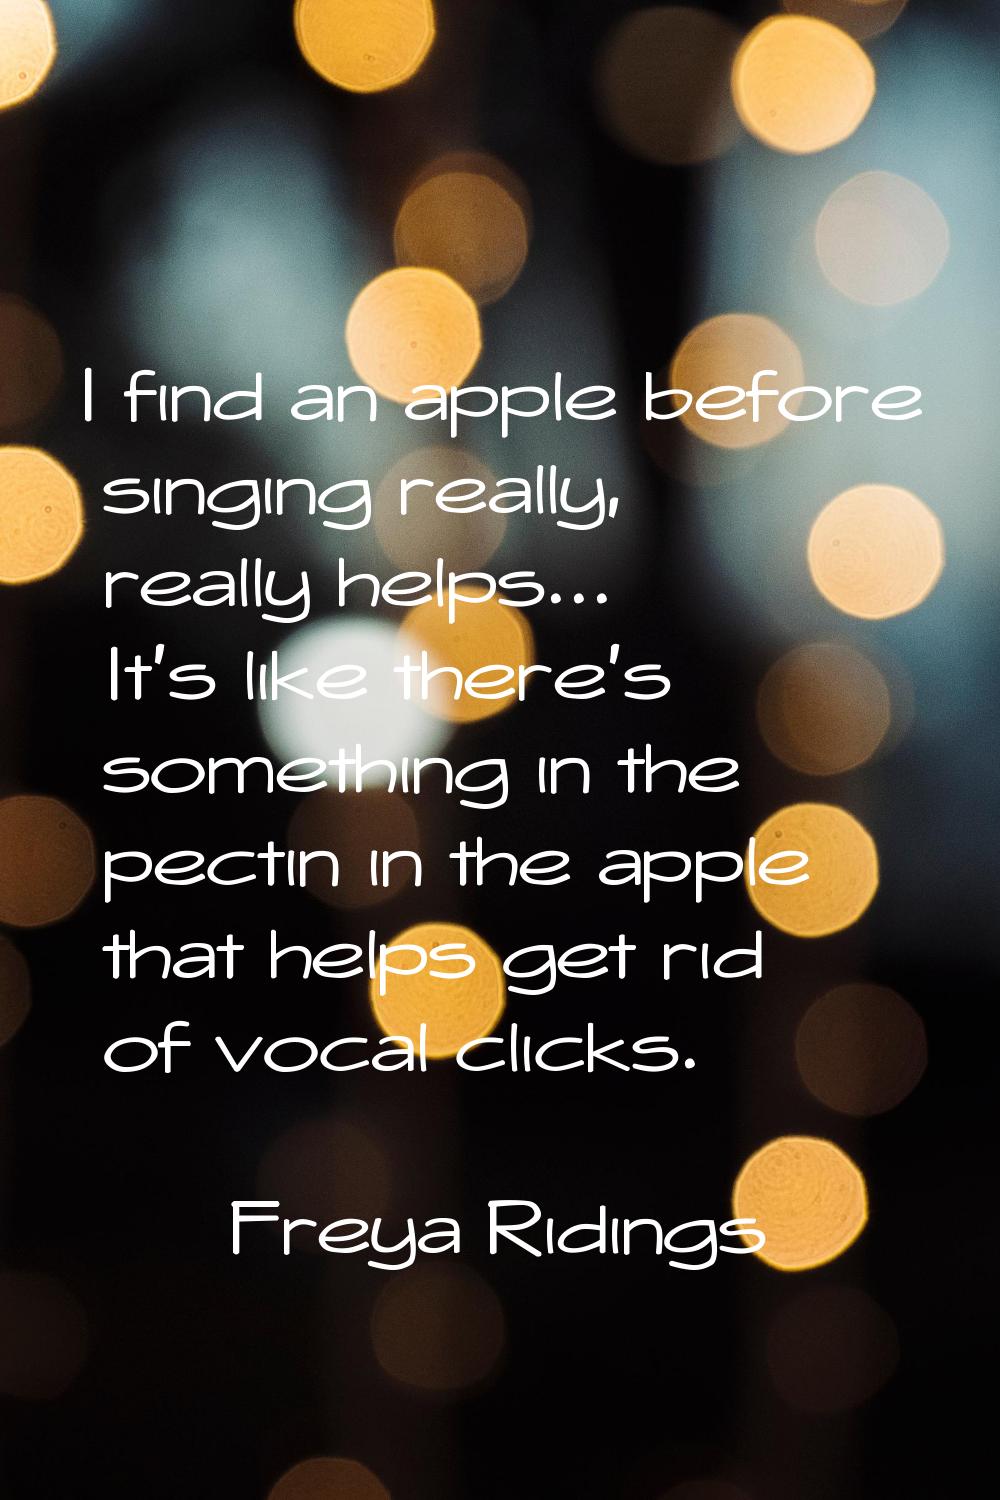 I find an apple before singing really, really helps... It's like there's something in the pectin in